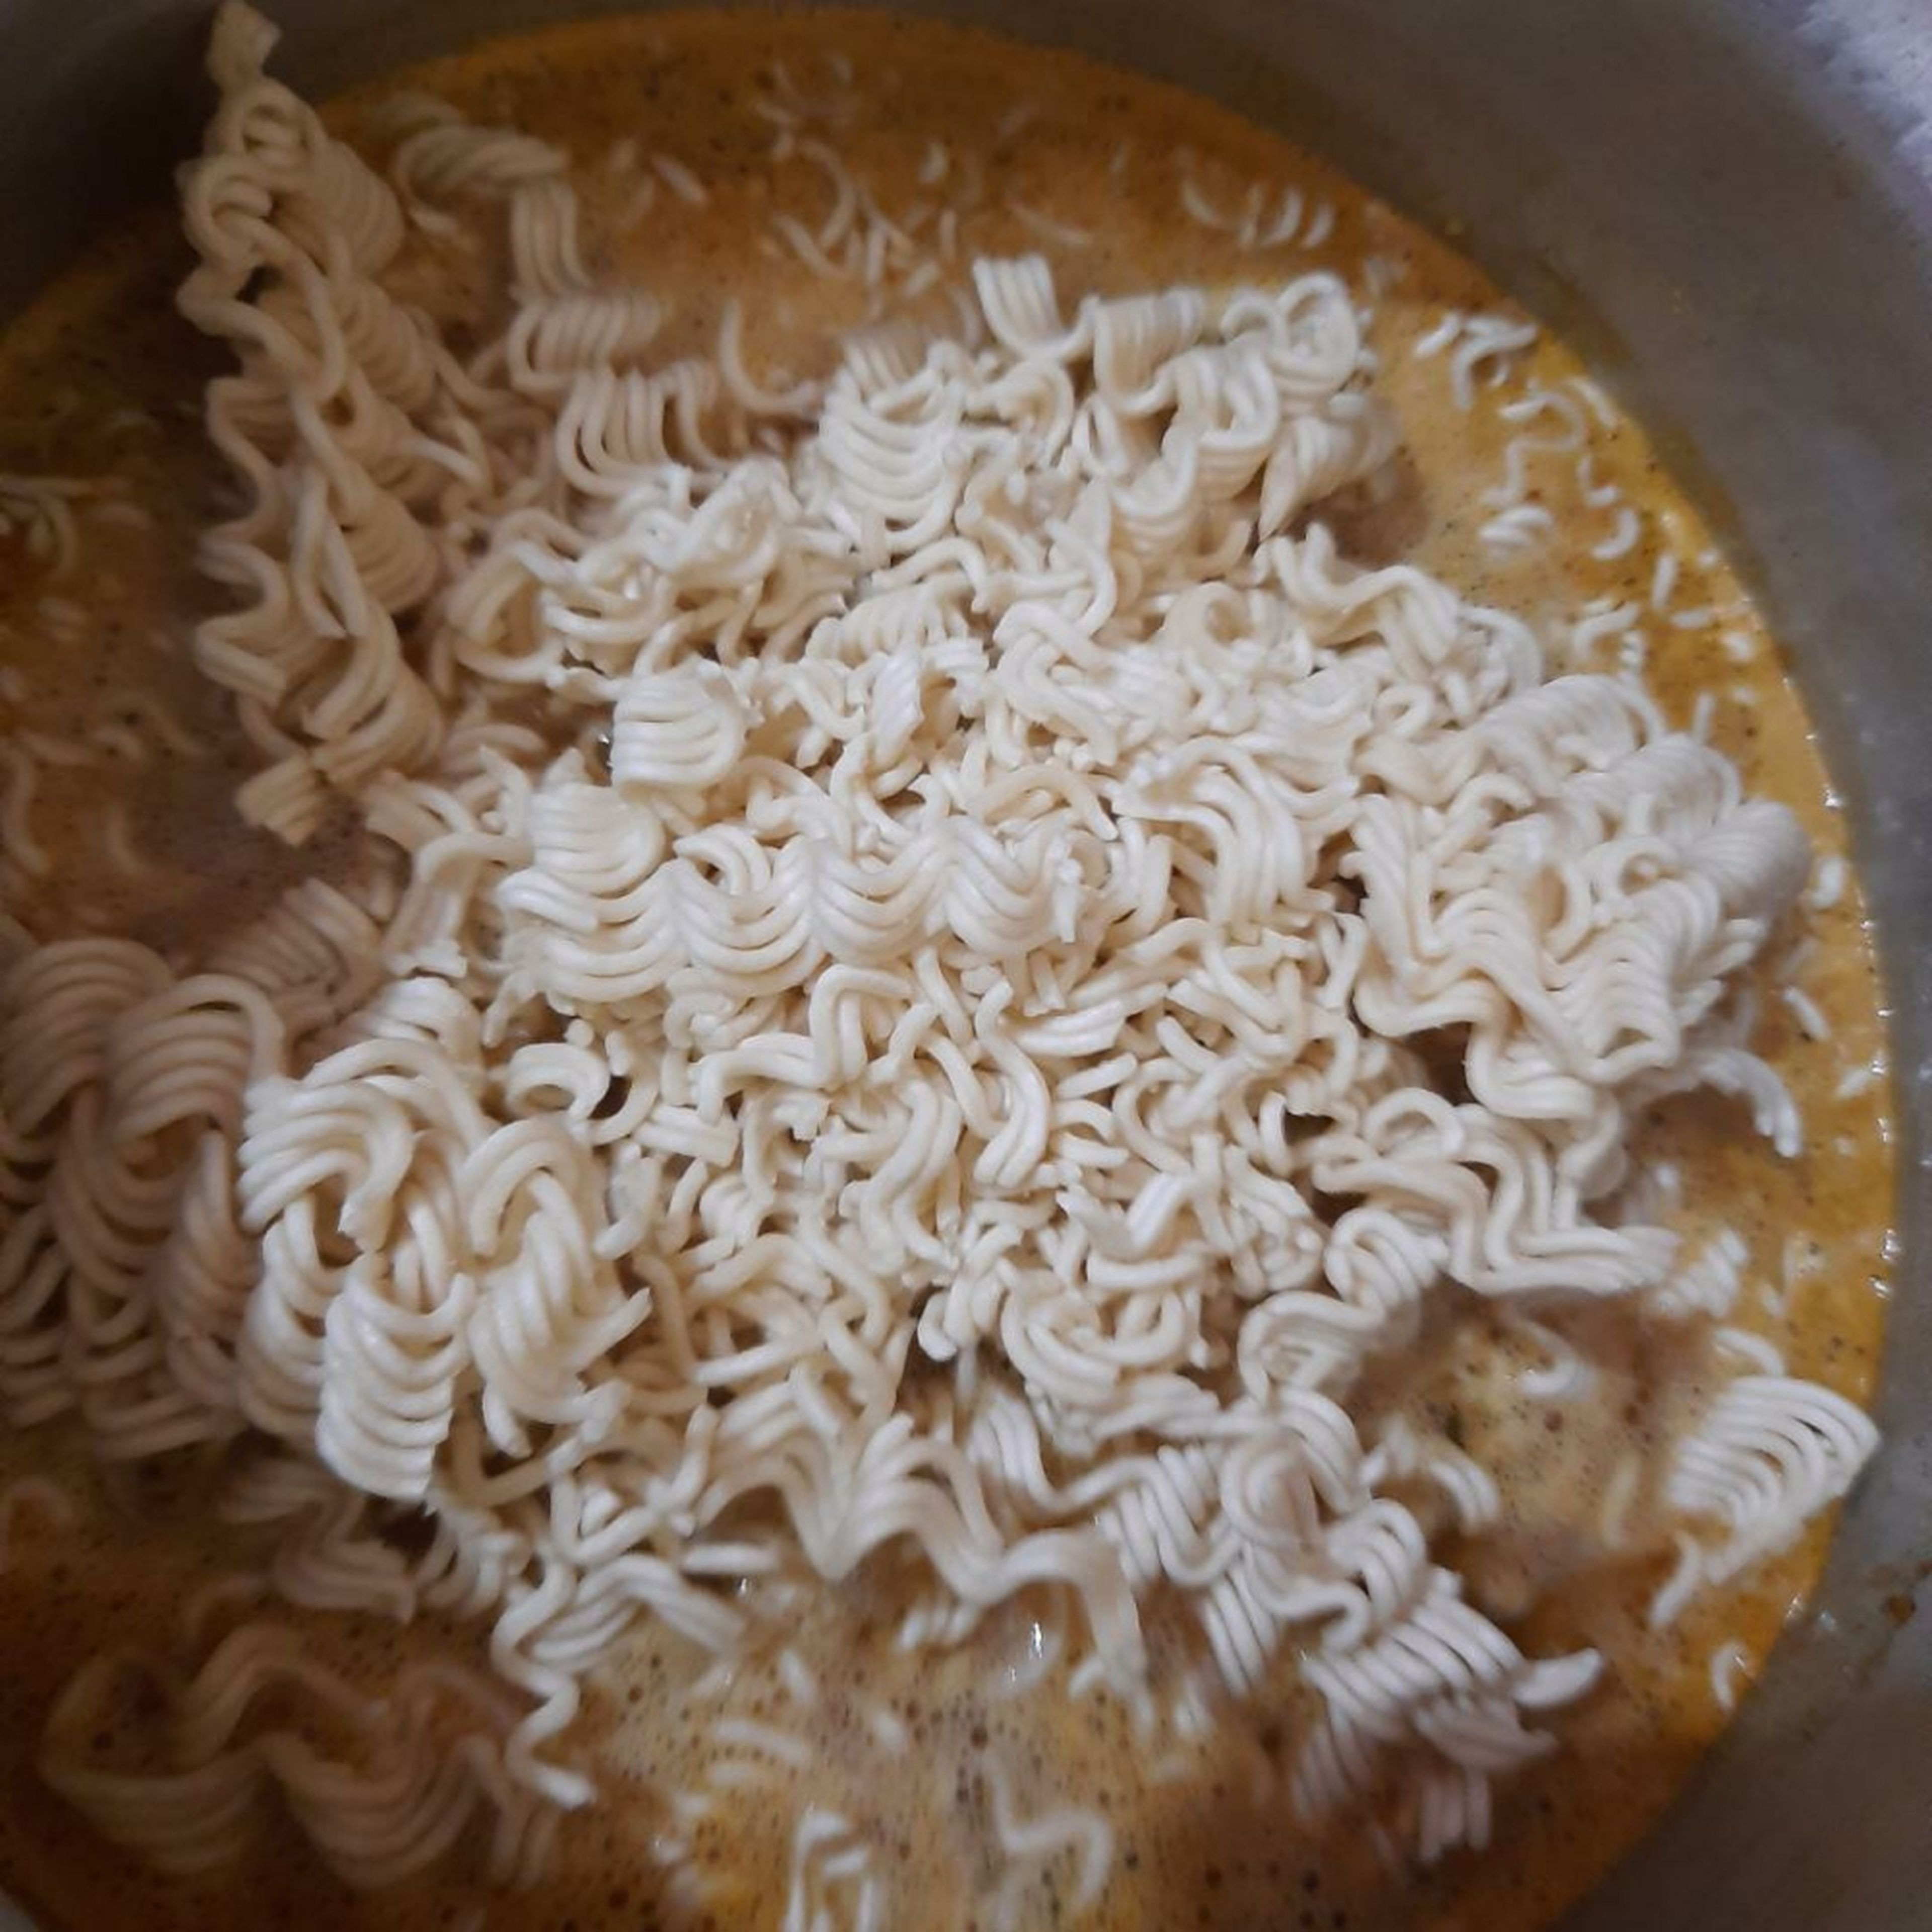 Once the water is boiled, add the instant noodle bars in the water.